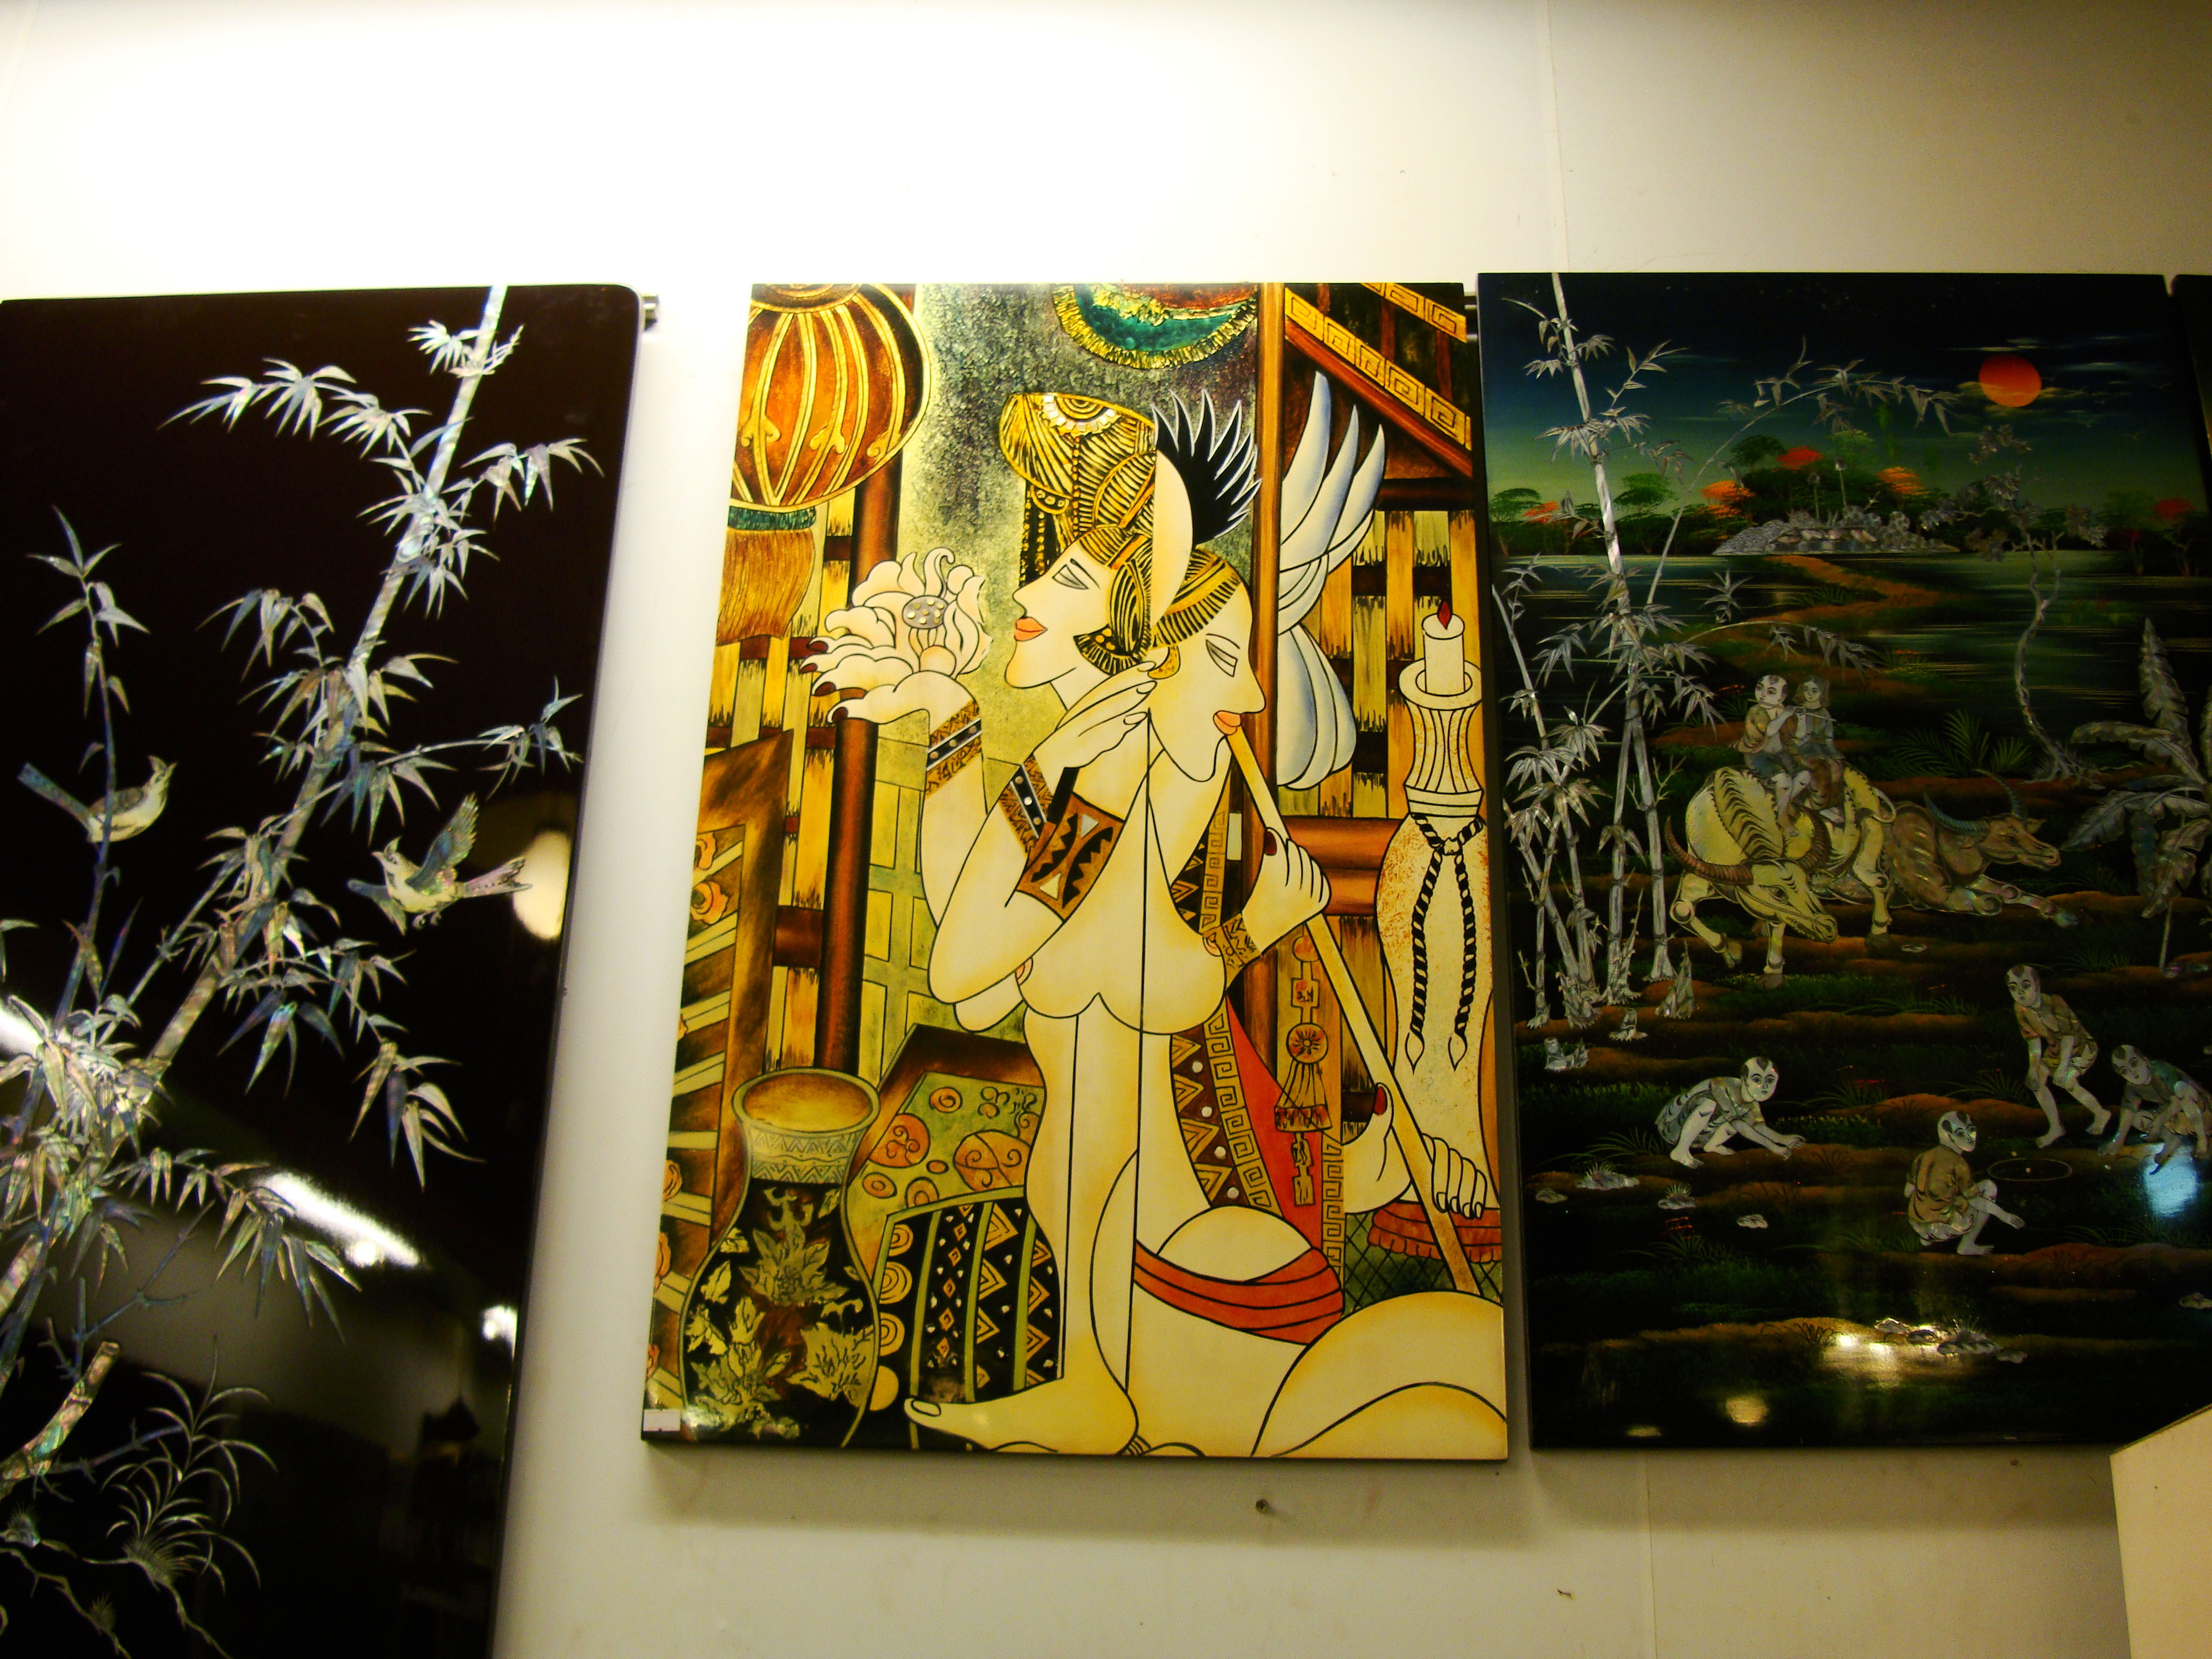 Vietnamese Lacquerware paintings Tay Son District 3 HCMC 2009 18